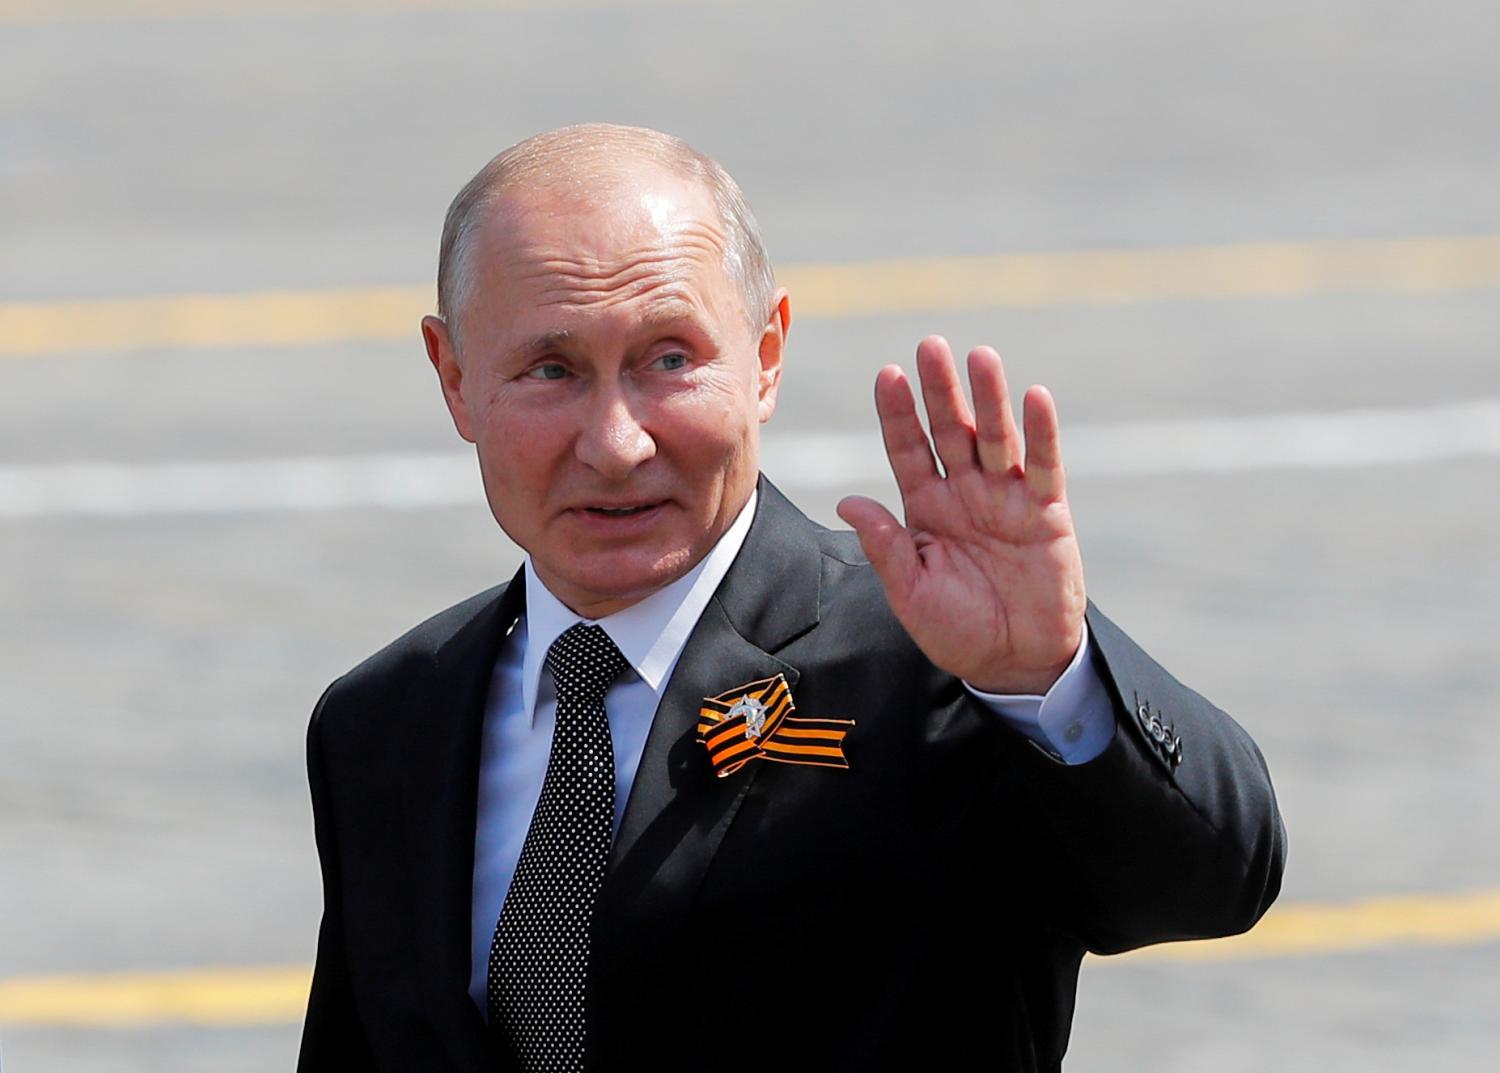 FILE PHOTO: Russia's President Vladimir Putin waves as he leaves after the Victory Day Parade in Red Square in Moscow, Russia June 24, 2020. The military parade, marking the 75th anniversary of the victory over Nazi Germany in World War Two, was scheduled for May 9 but postponed due to the outbreak of the coronavirus disease (COVID-19). REUTERS/Maxim Shemetov - RC2NFH9L23BA/File Photo